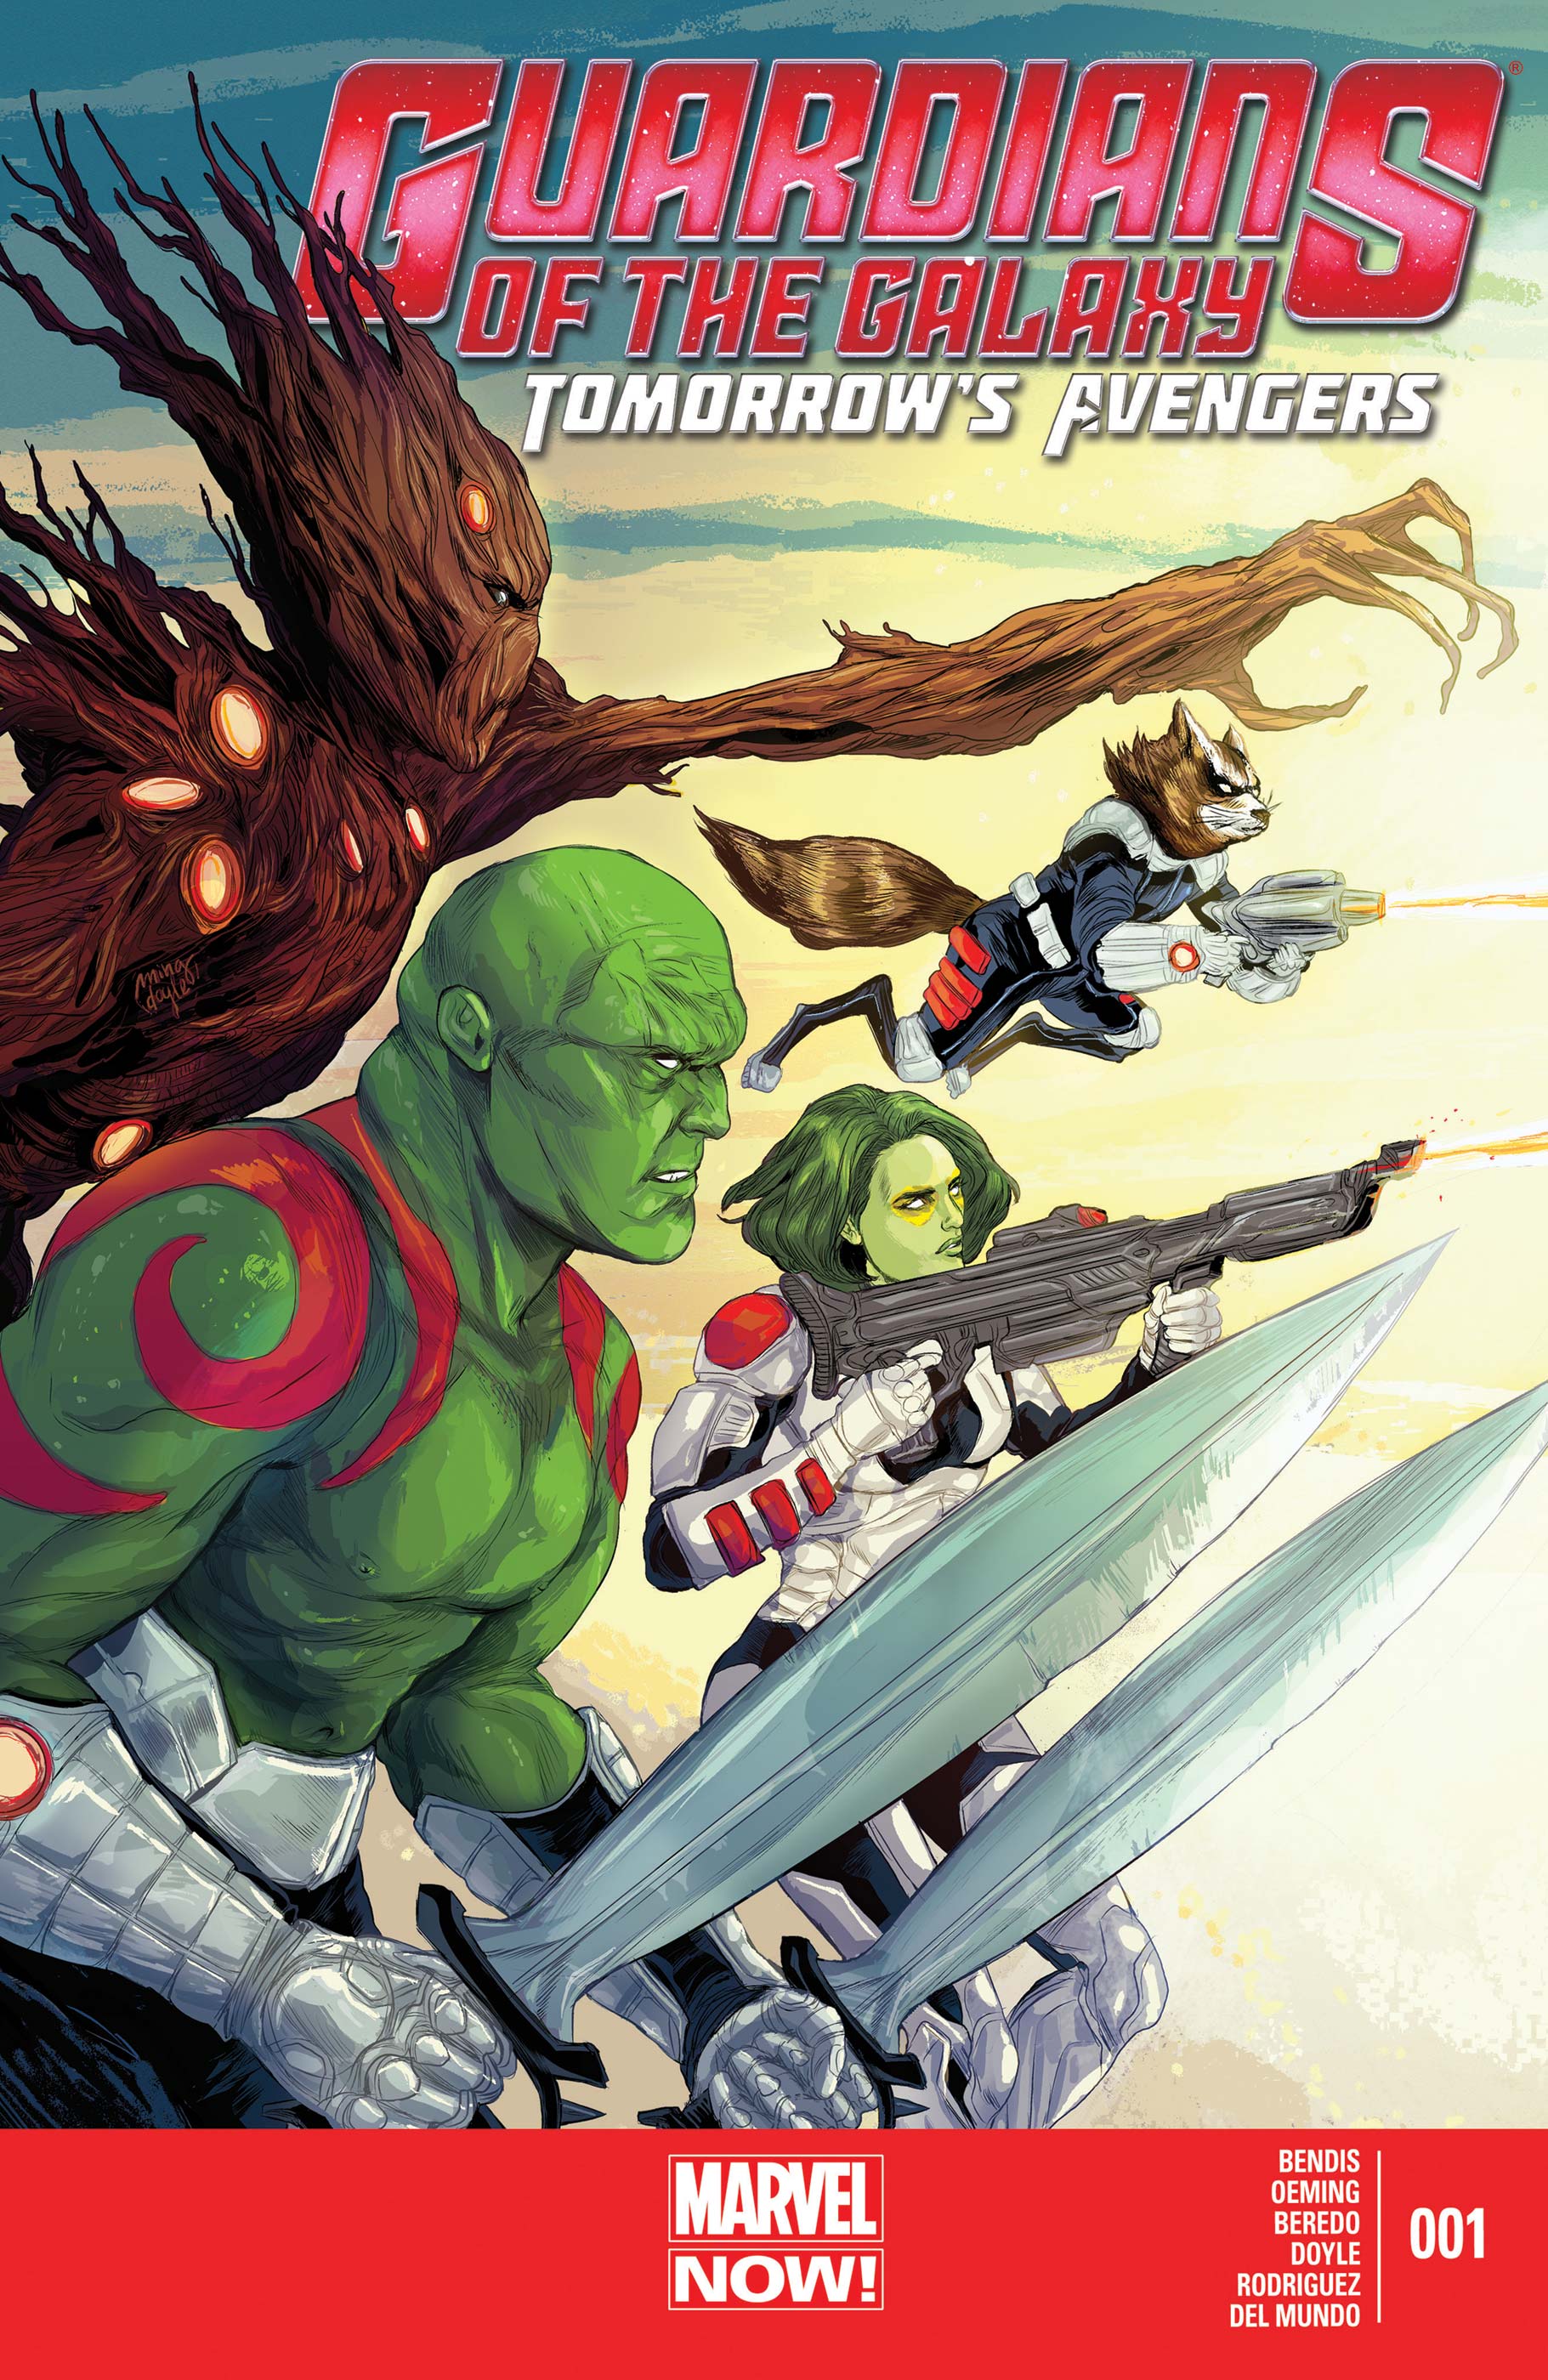 Guardians of the Galaxy: Tomorrow's Avengers Vol. 2 (Trade Paperback)